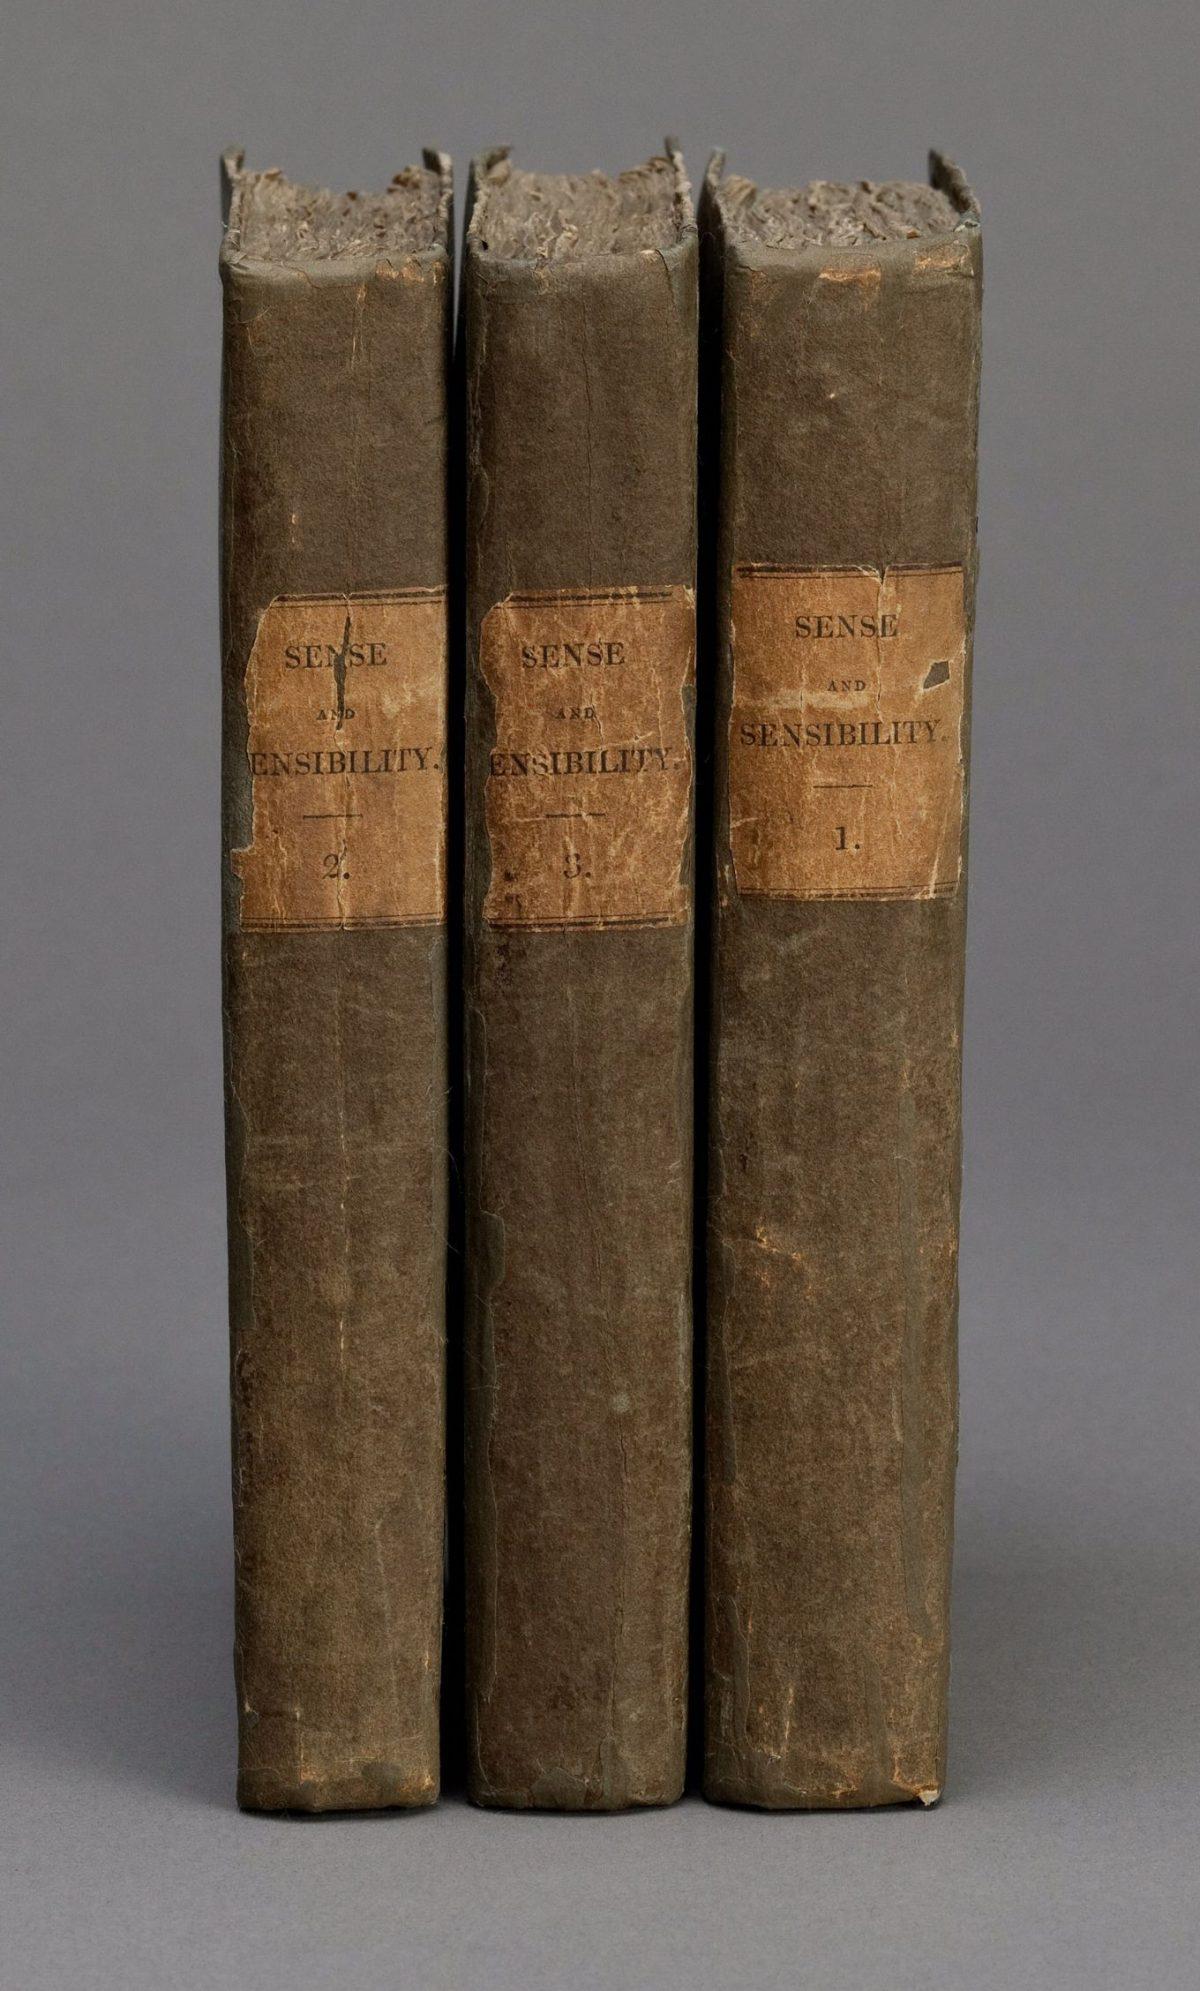 "Sense and Sensibility," 1811, by Jane Austen. First edition. Houghton Library, Harvard University. (Public Domain)